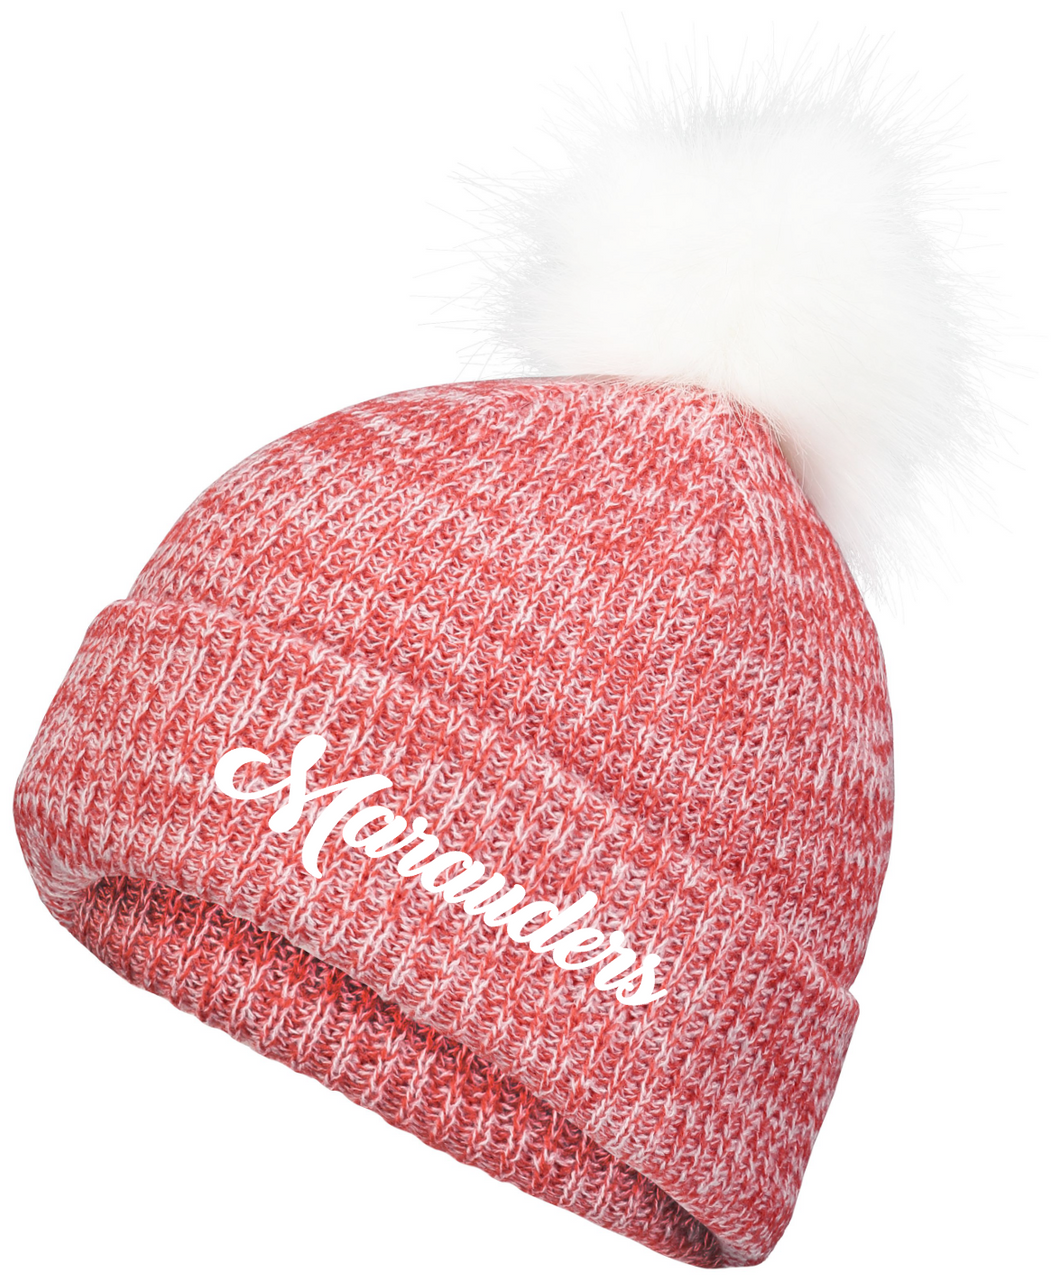 Winter Beanie Red with White Pom